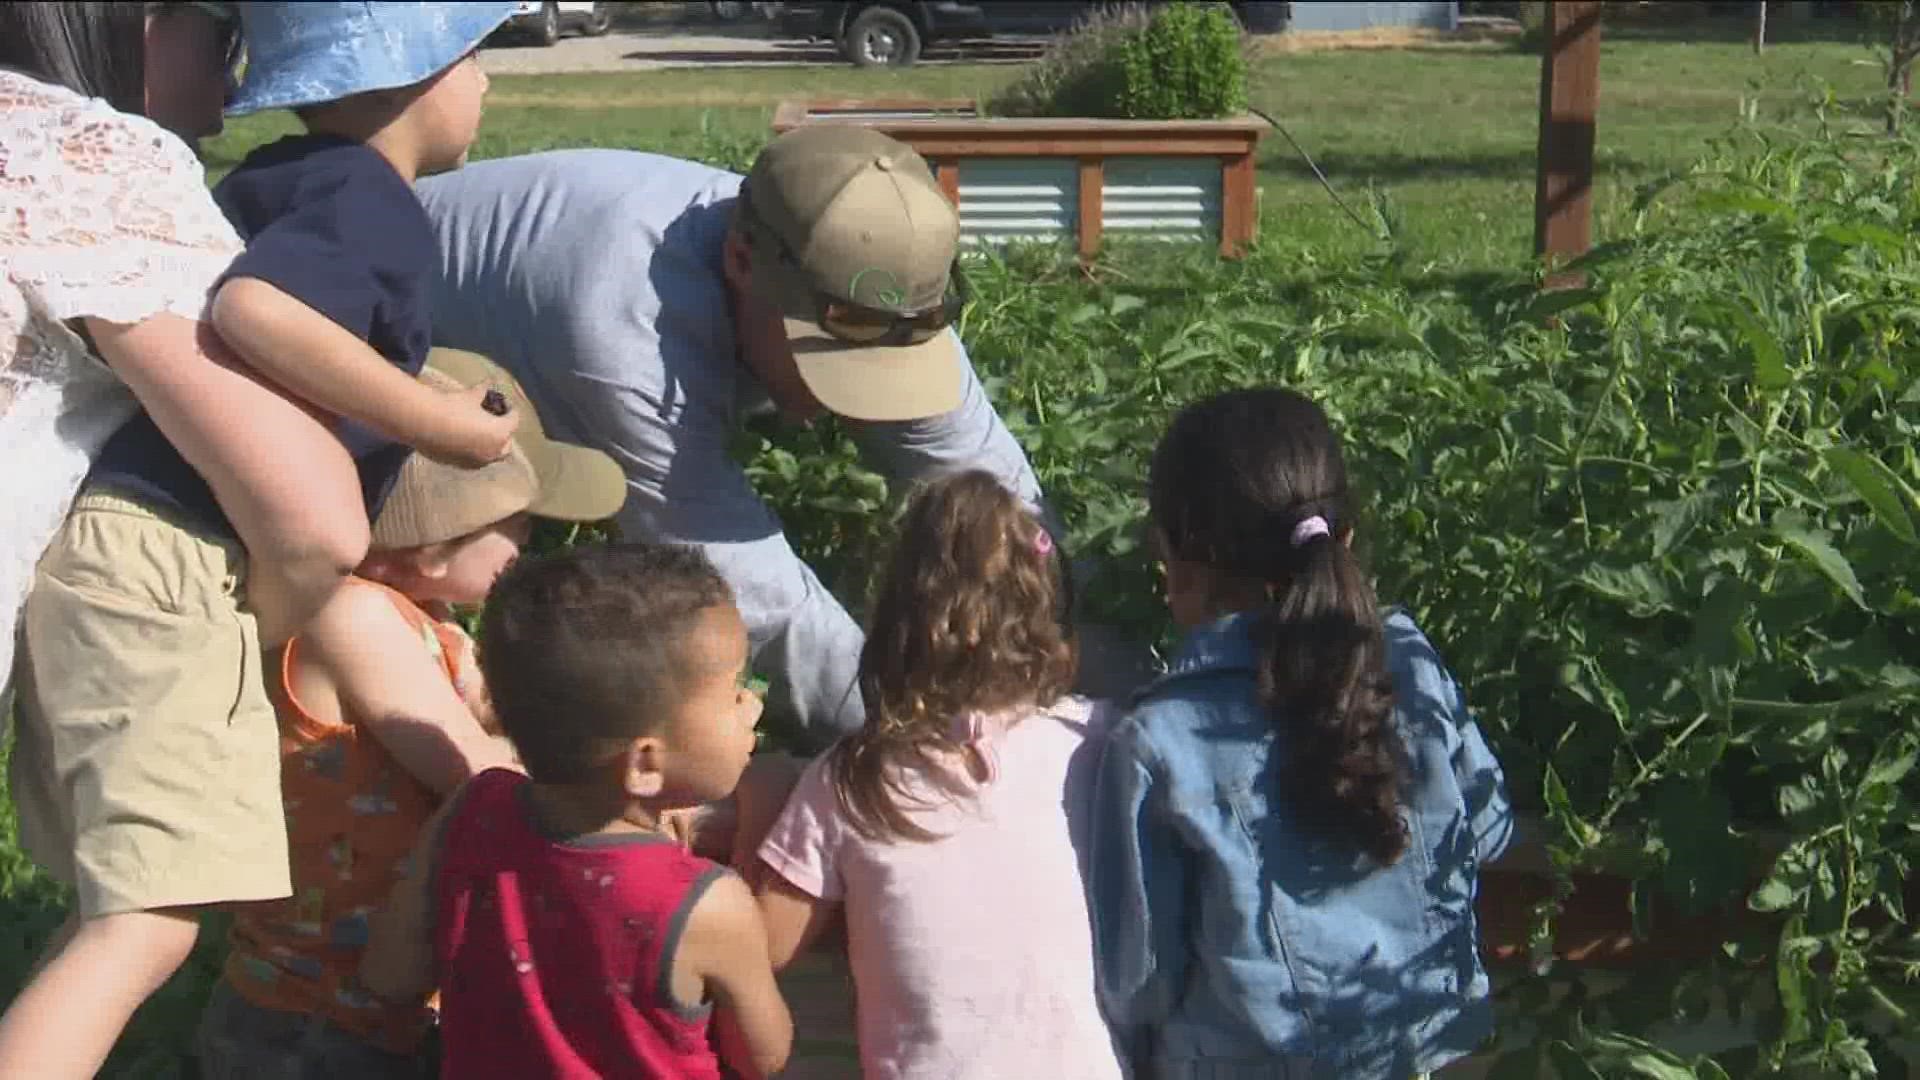 Global Gardens and Nutrition Works have teamed up to provide fresh produce for seven daycare centers in the Treasure Valley.